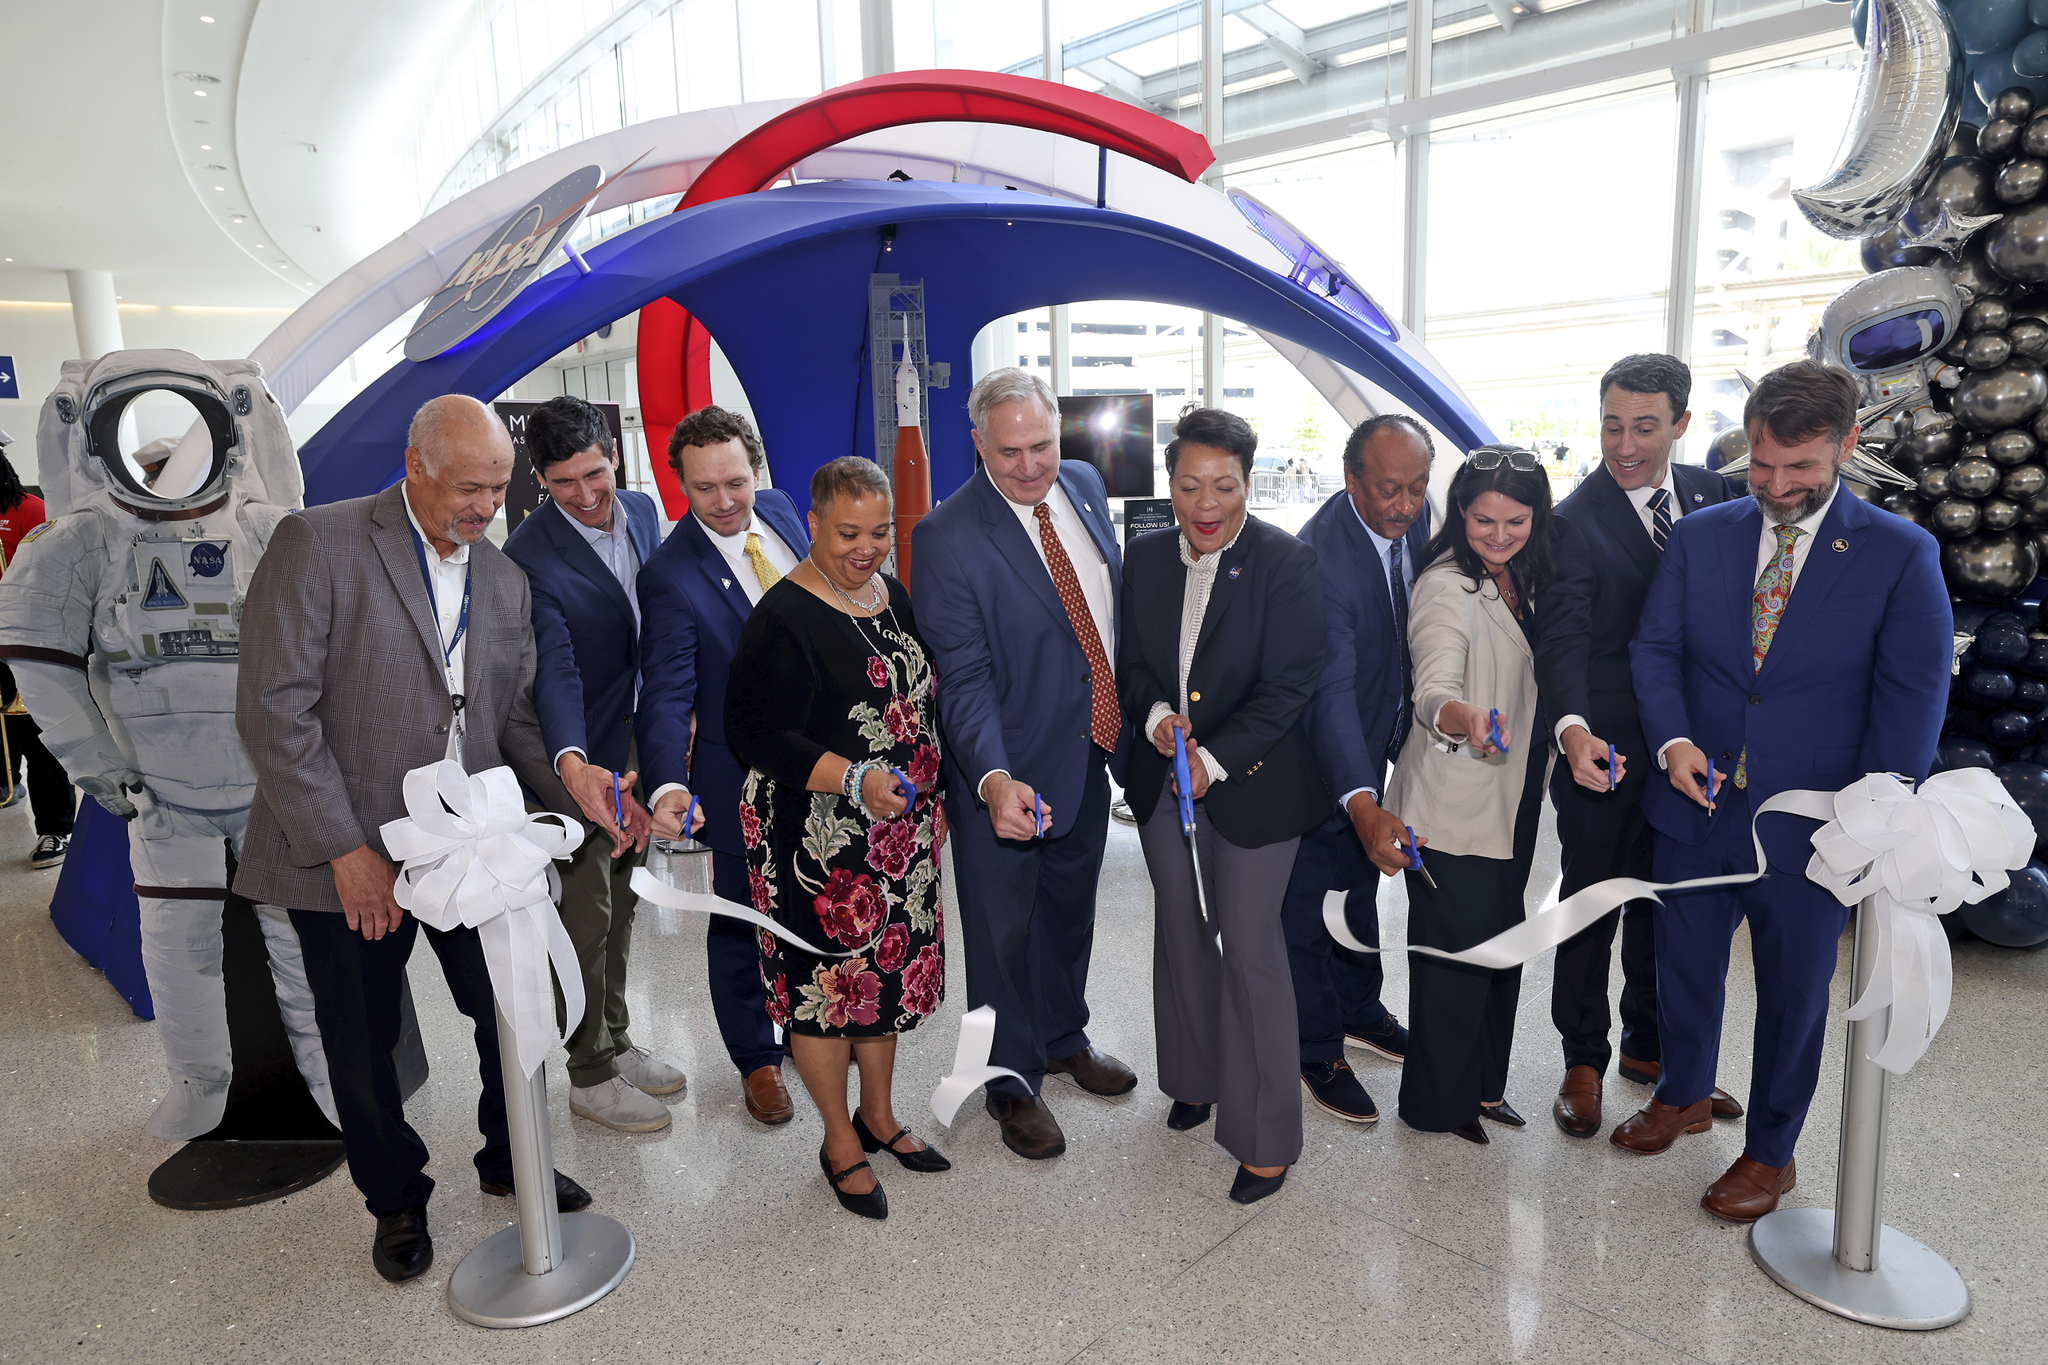 From left, New Orleans Airport Director Kevin Dolliole, New Orleans Director of Economic Development Jeff Schwartz, Space Launch System Stages Element Office Resident Management Office Manager Gregg Eldridge, Congressman Carter’s District Director Demetric Mercadel, Michoud Director Lonnie Dutreix, New Orleans Mayor LaToya Cantrell, Judge Michael Bagneris, New Orleans & Co. Executive Vice-President Alice Glenn, New Orleans Business Alliance Interim President Louis David, and GNO Inc. Senior Vice-President of Business Development Josh Fleig cut the ribbon at the NASA educational display ribbon-cutting ceremony at Louis Armstrong International Airport in New Orleans.